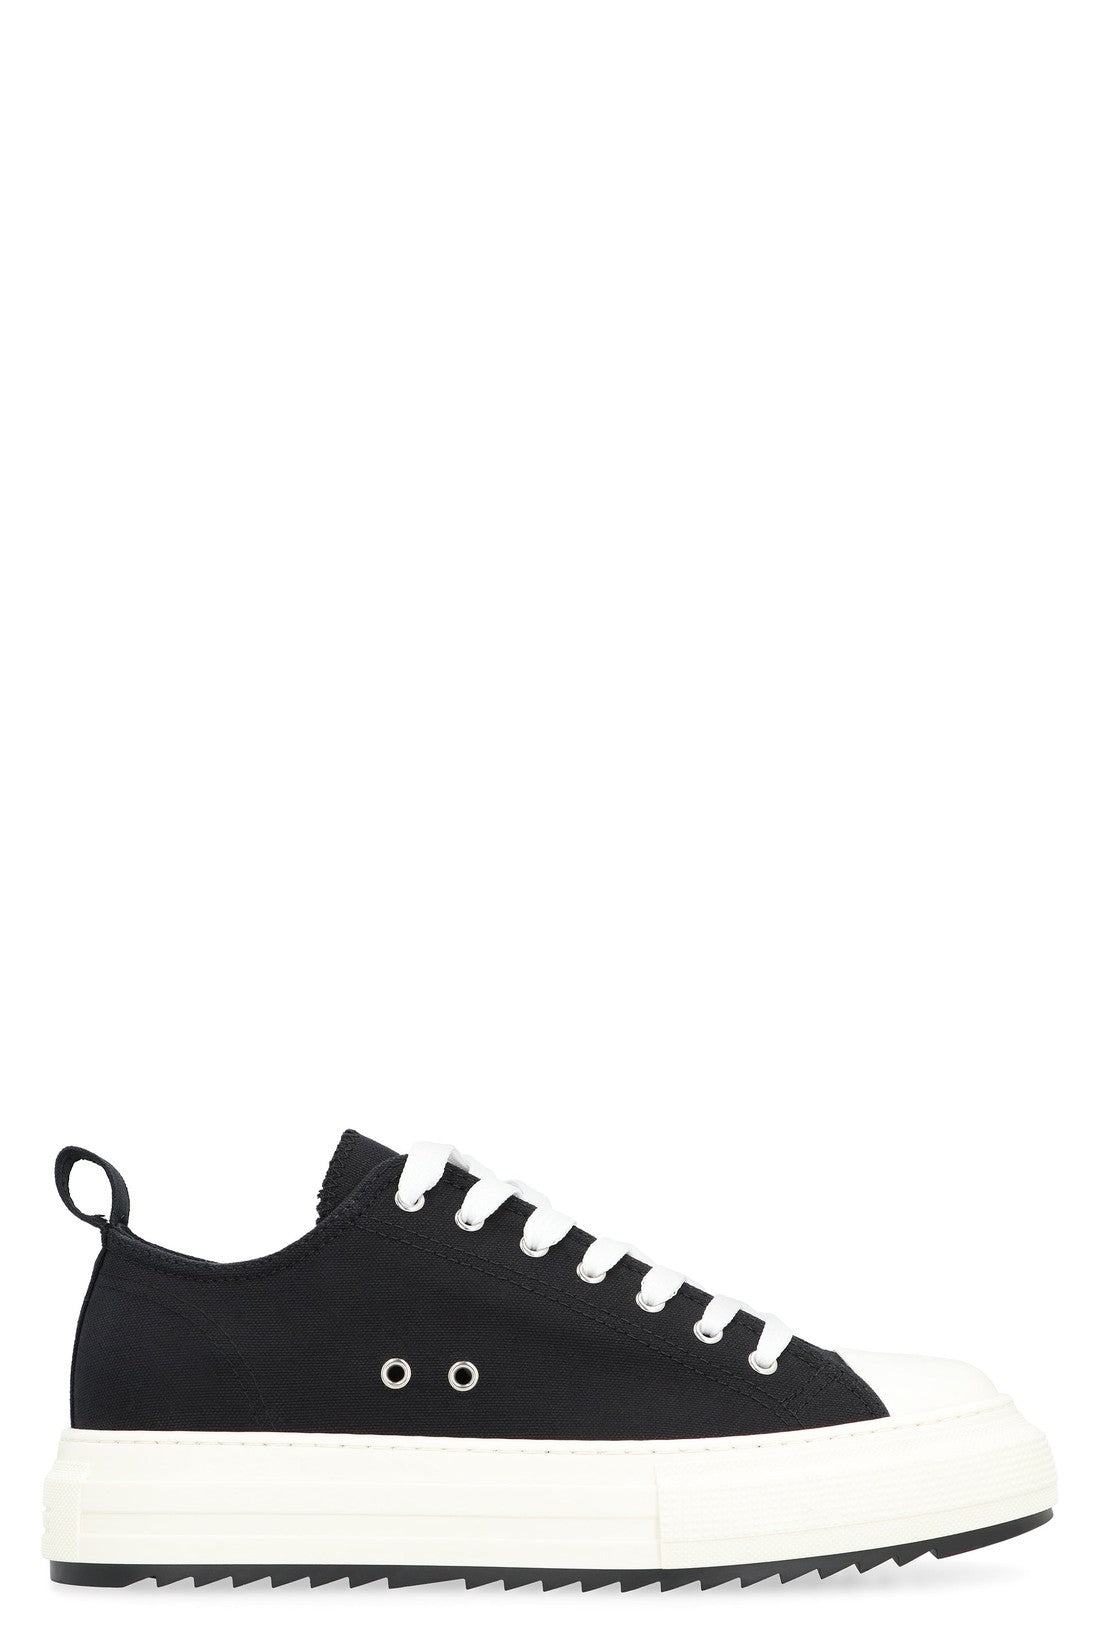 Dsquared2-OUTLET-SALE-Berlin fabric low-top sneakers-ARCHIVIST